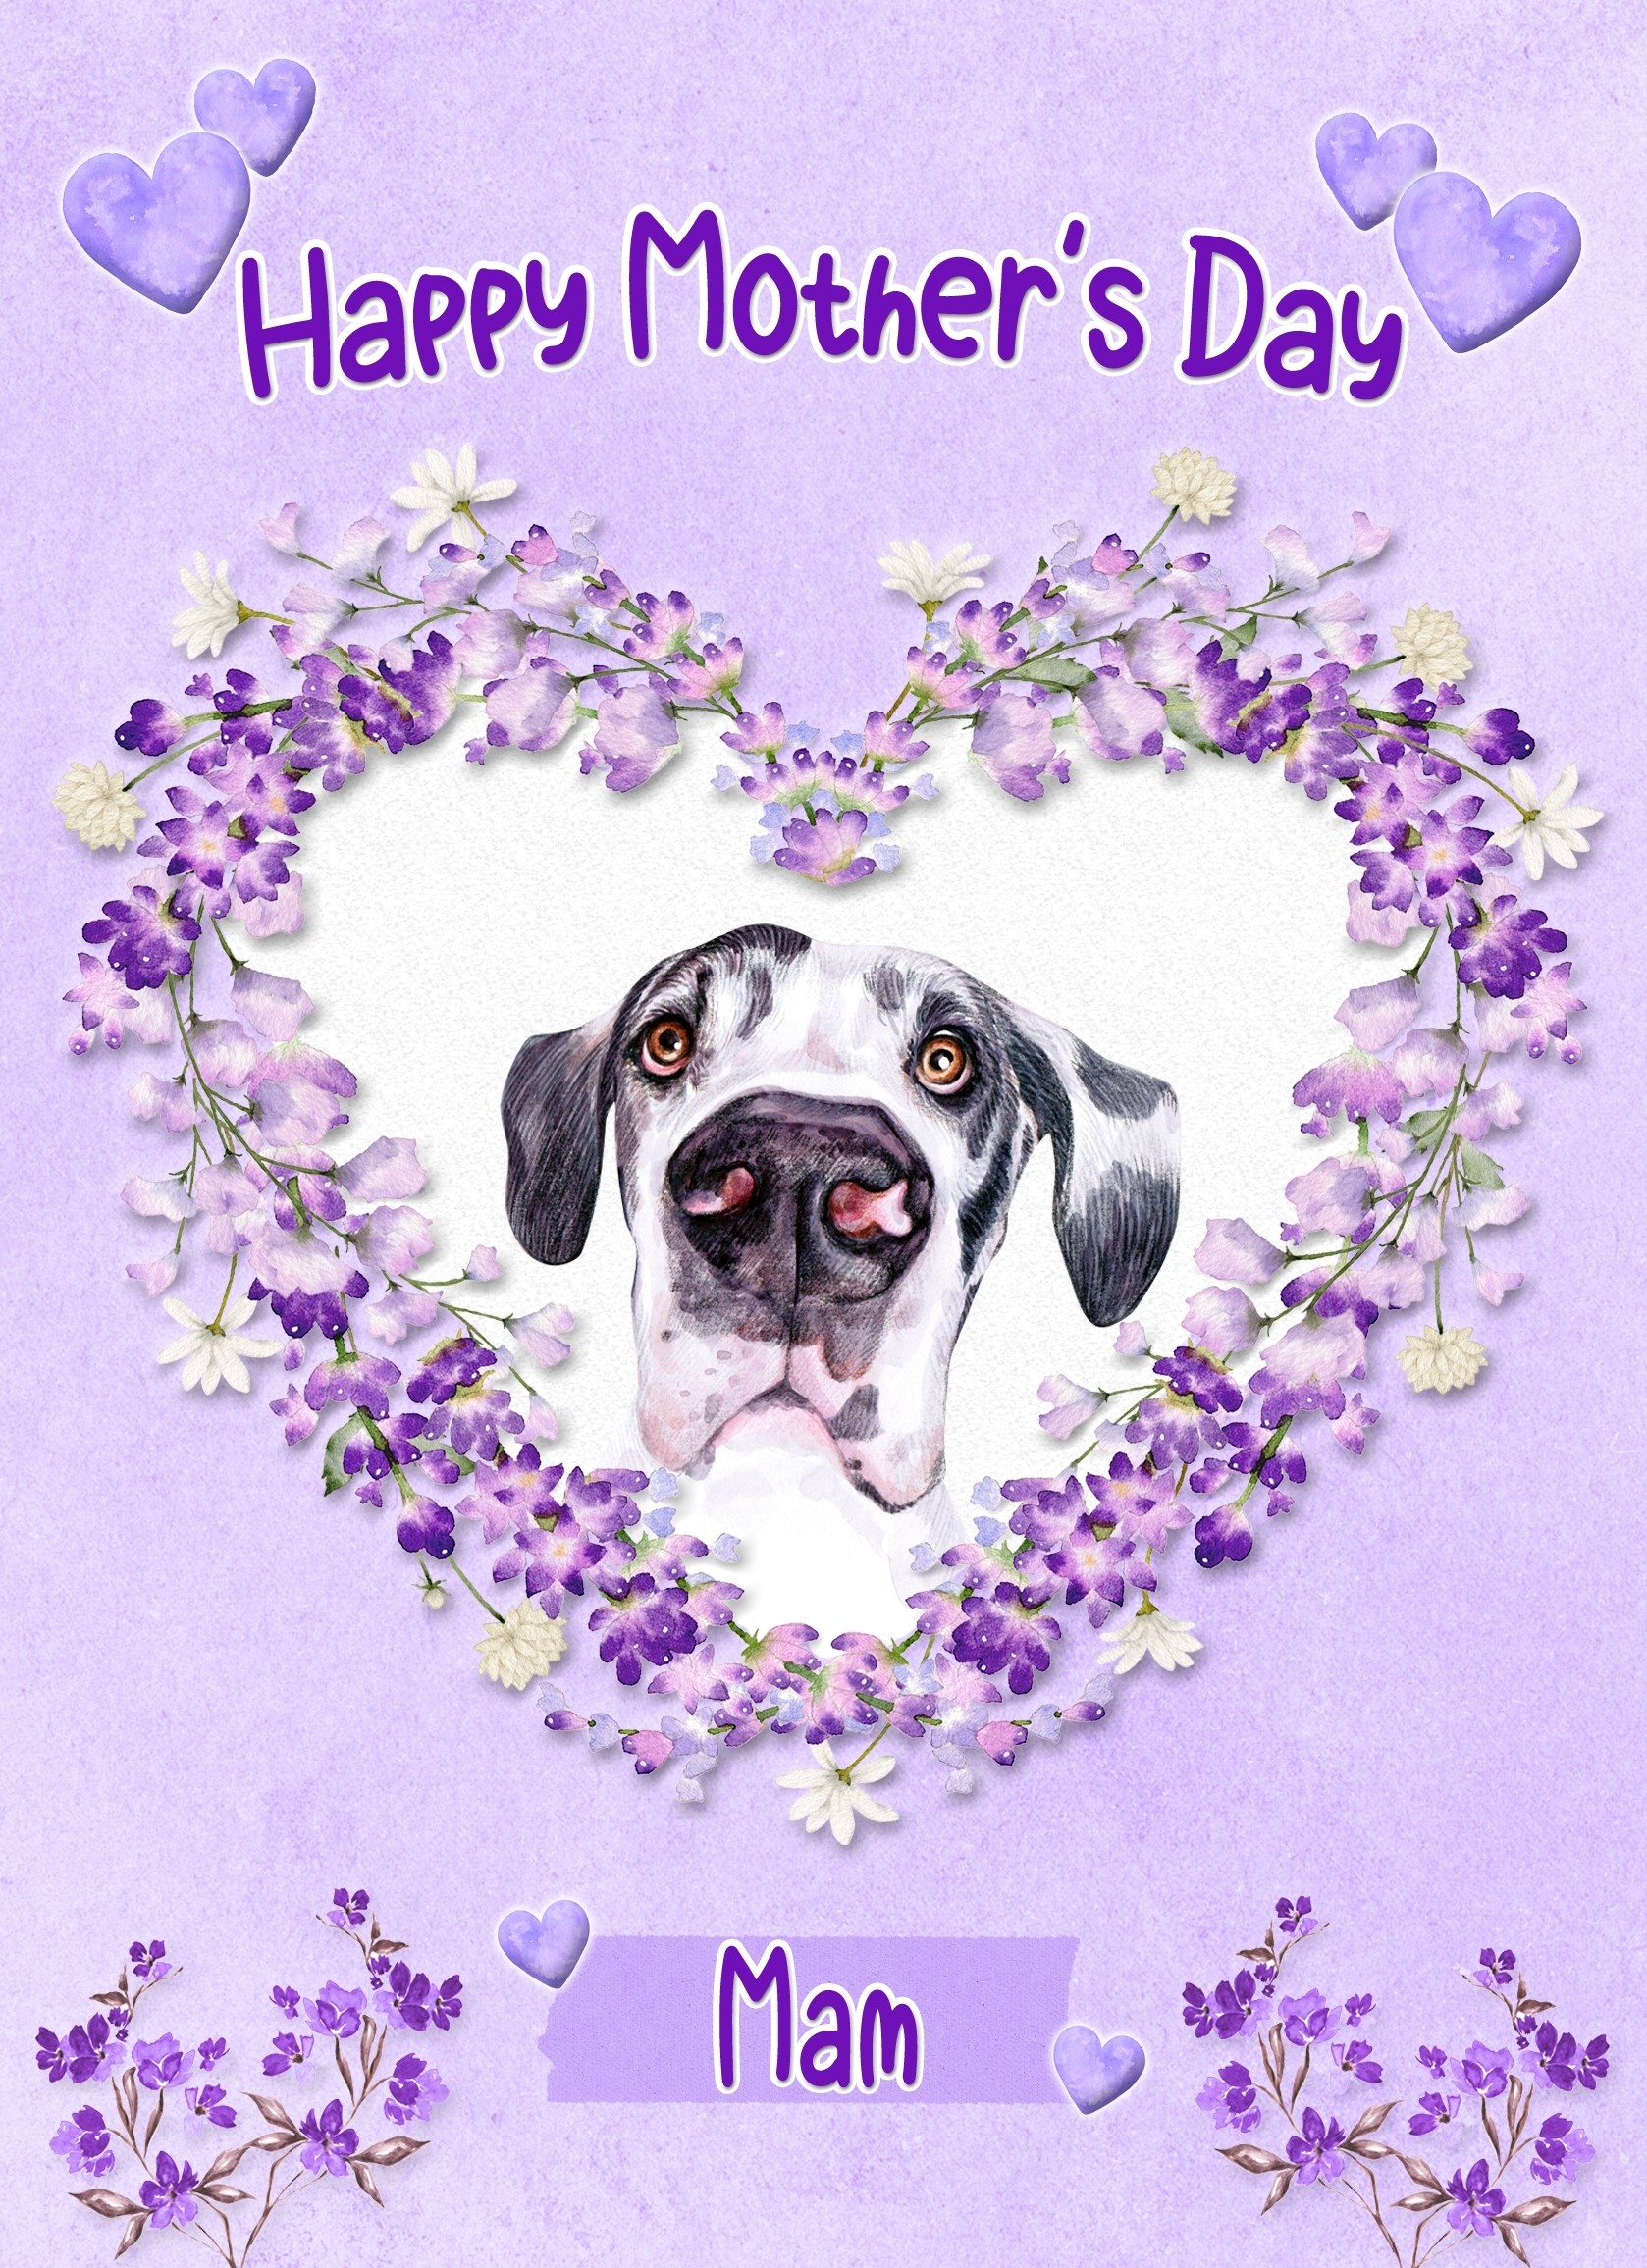 Great Dane Dog Mothers Day Card (Happy Mothers, Mam)